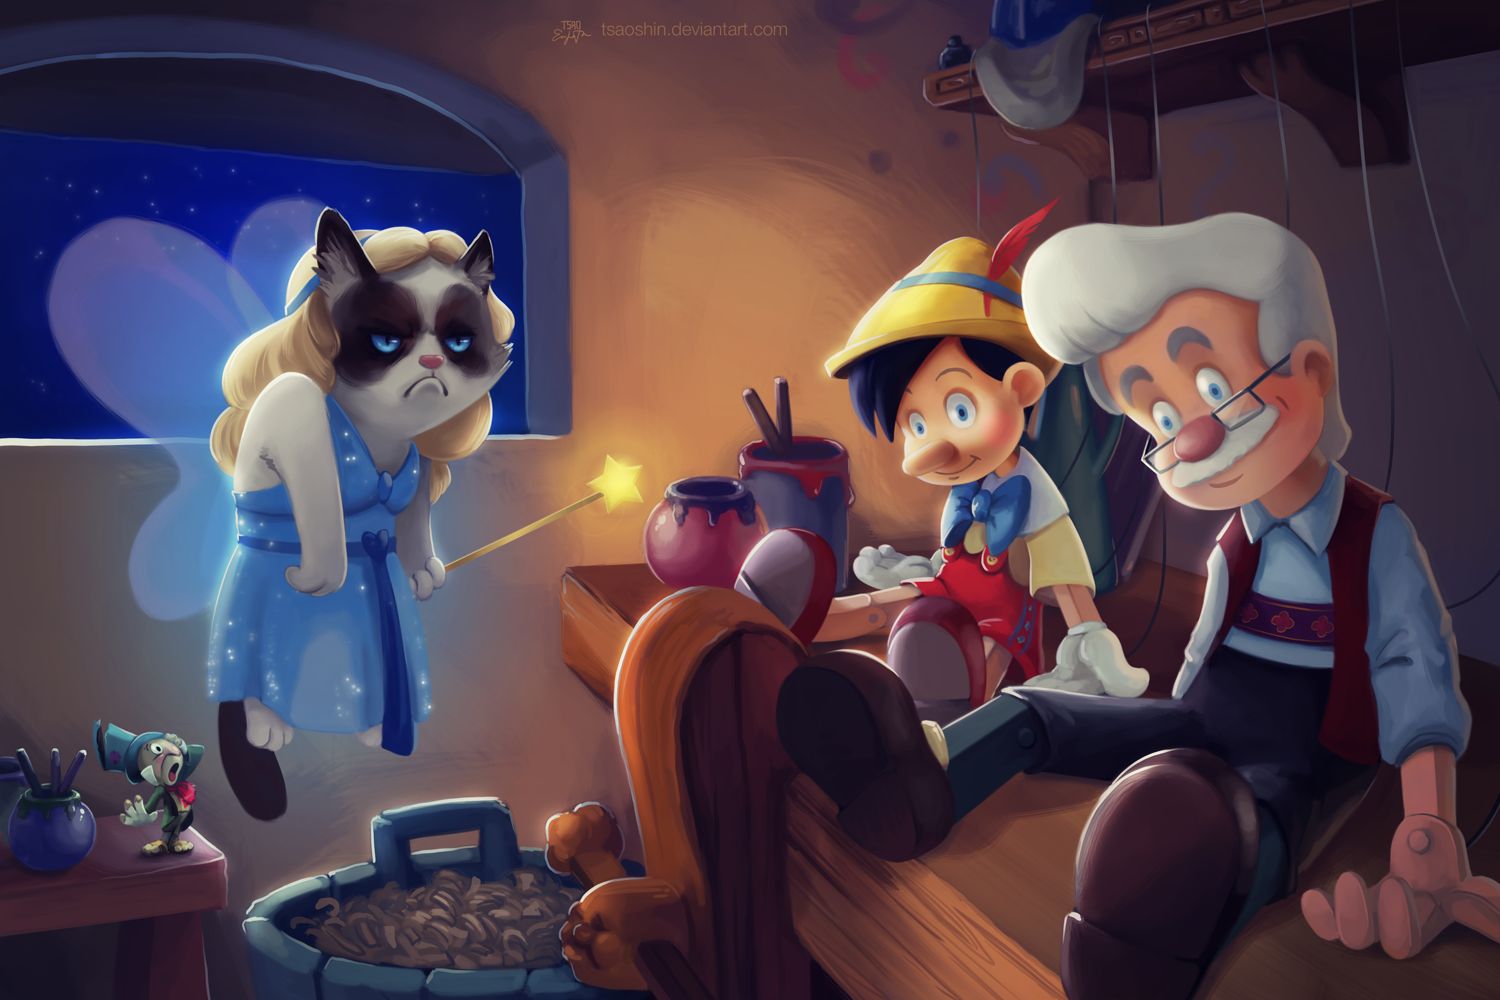 pinocchio, humor, movie, gepetto, grumpy cat cell phone wallpapers